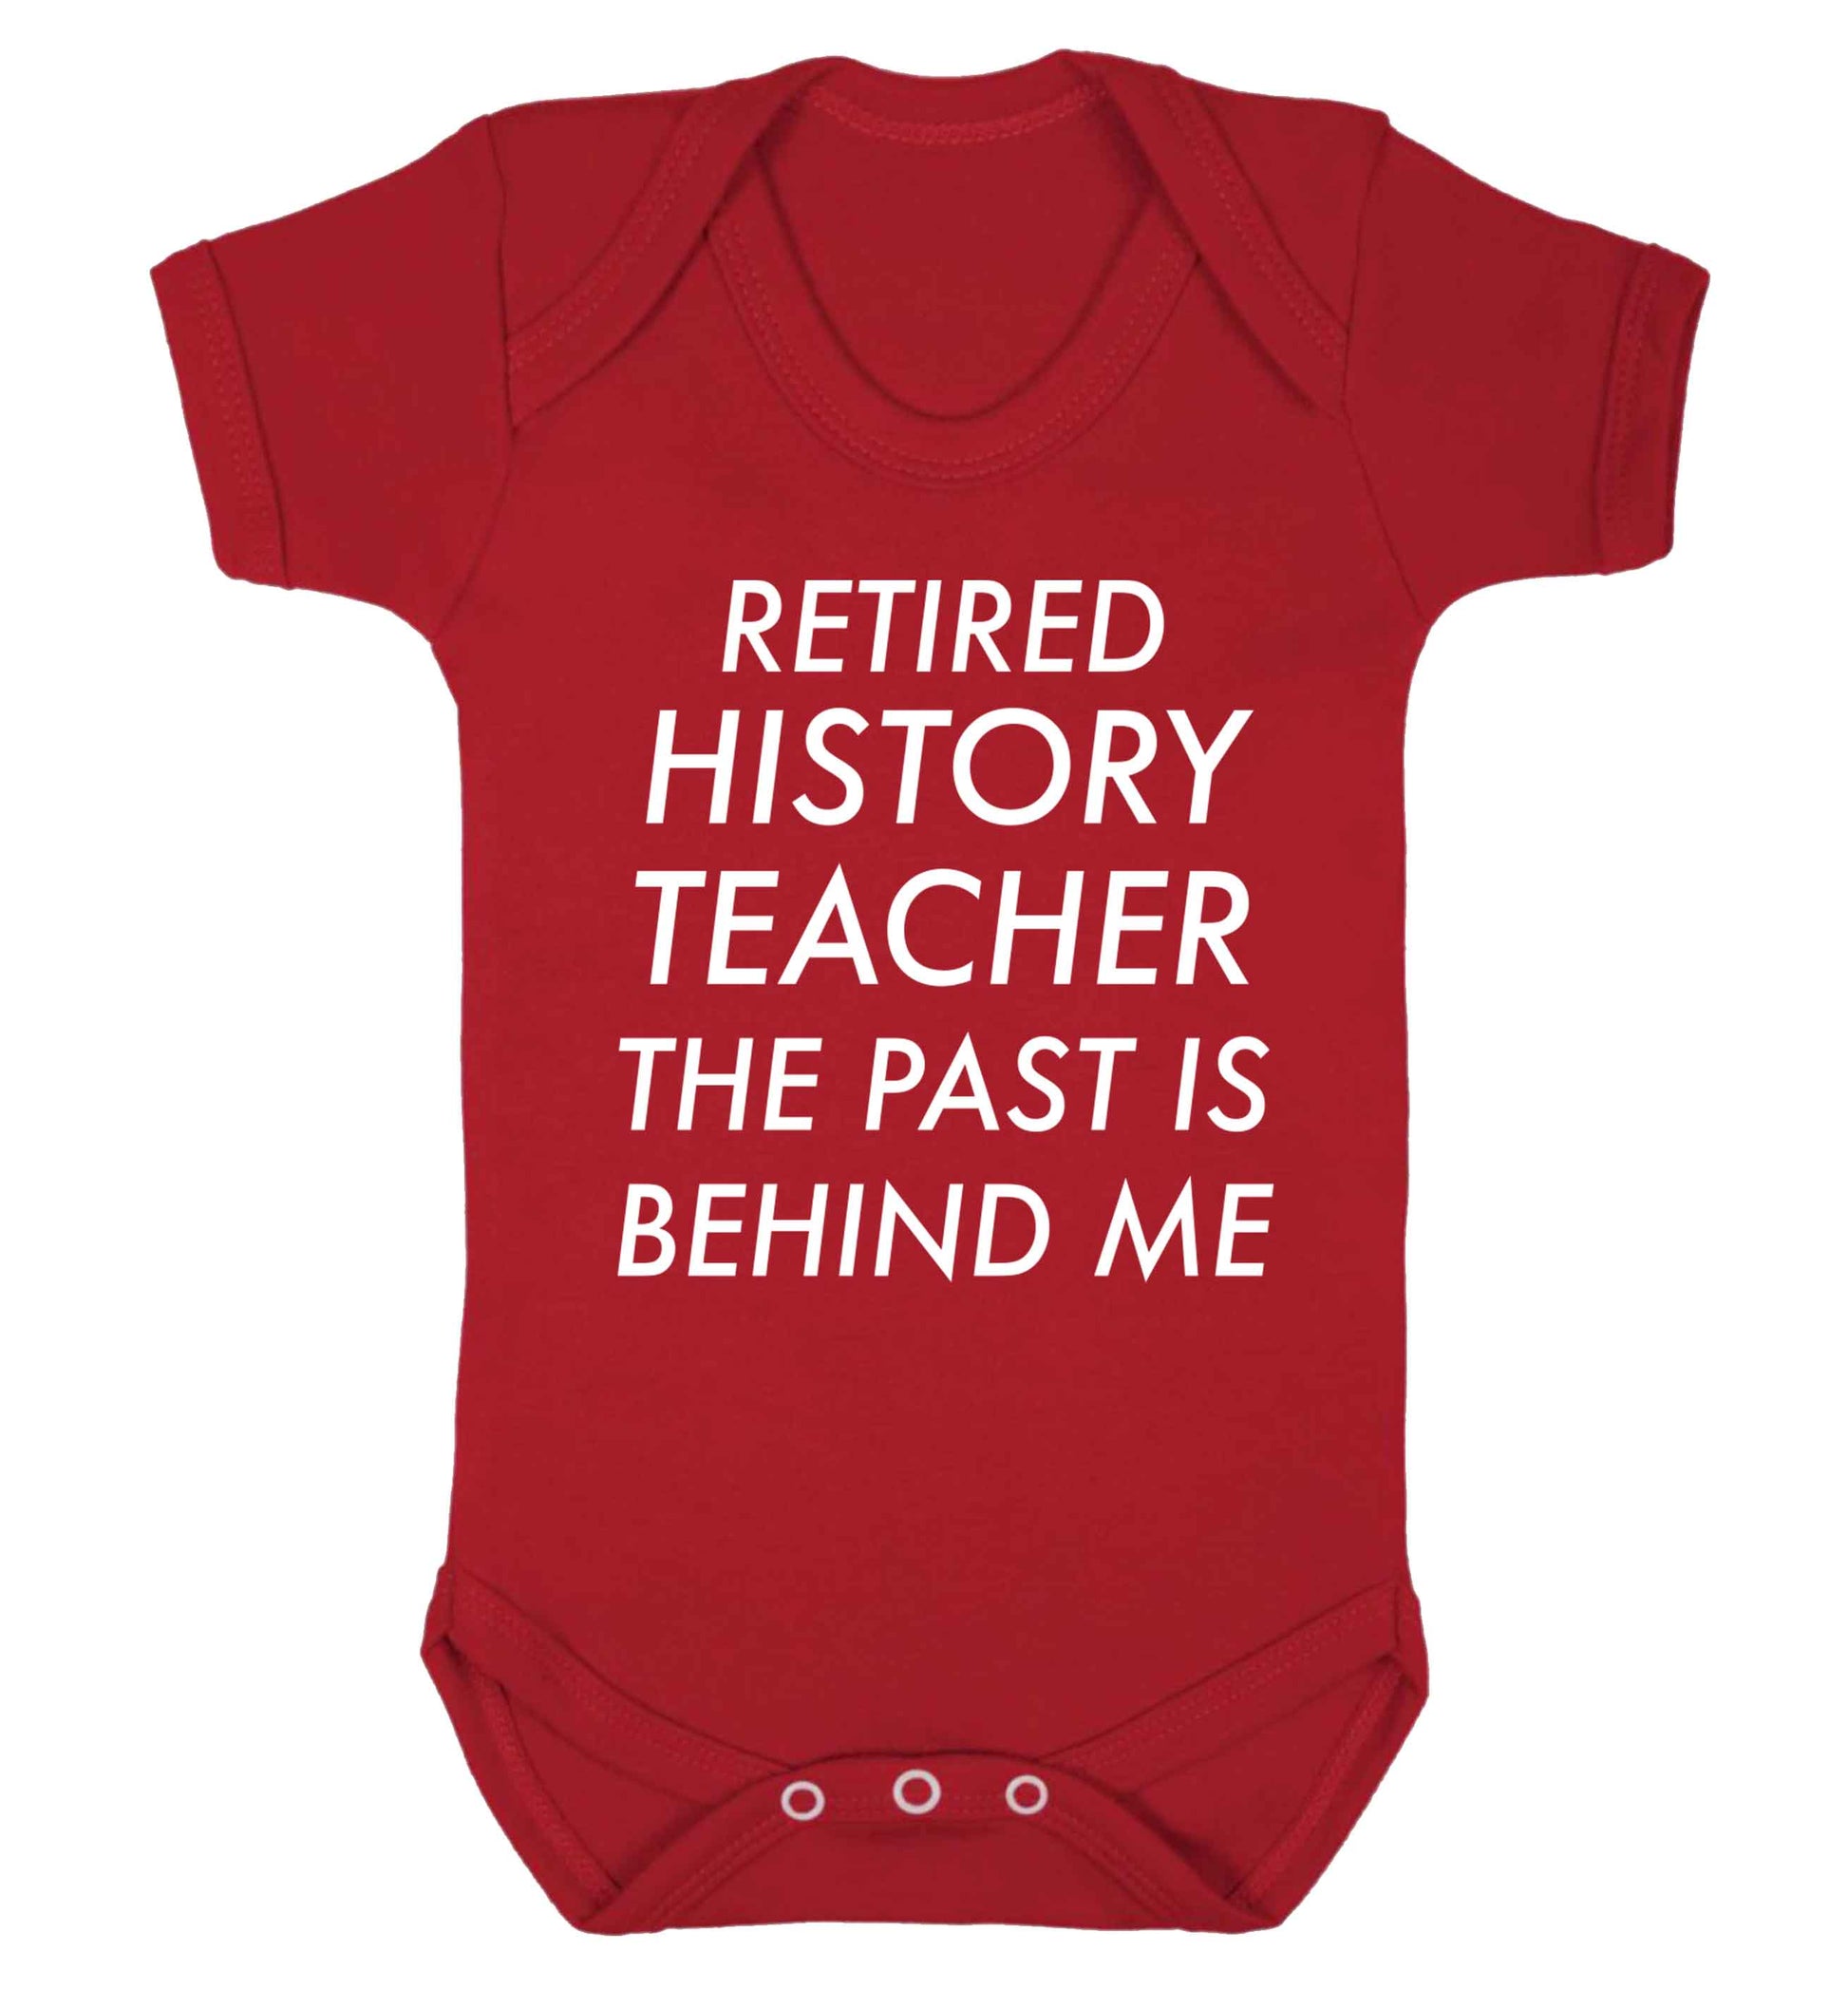 Retired history teacher the past is behind me Baby Vest red 18-24 months